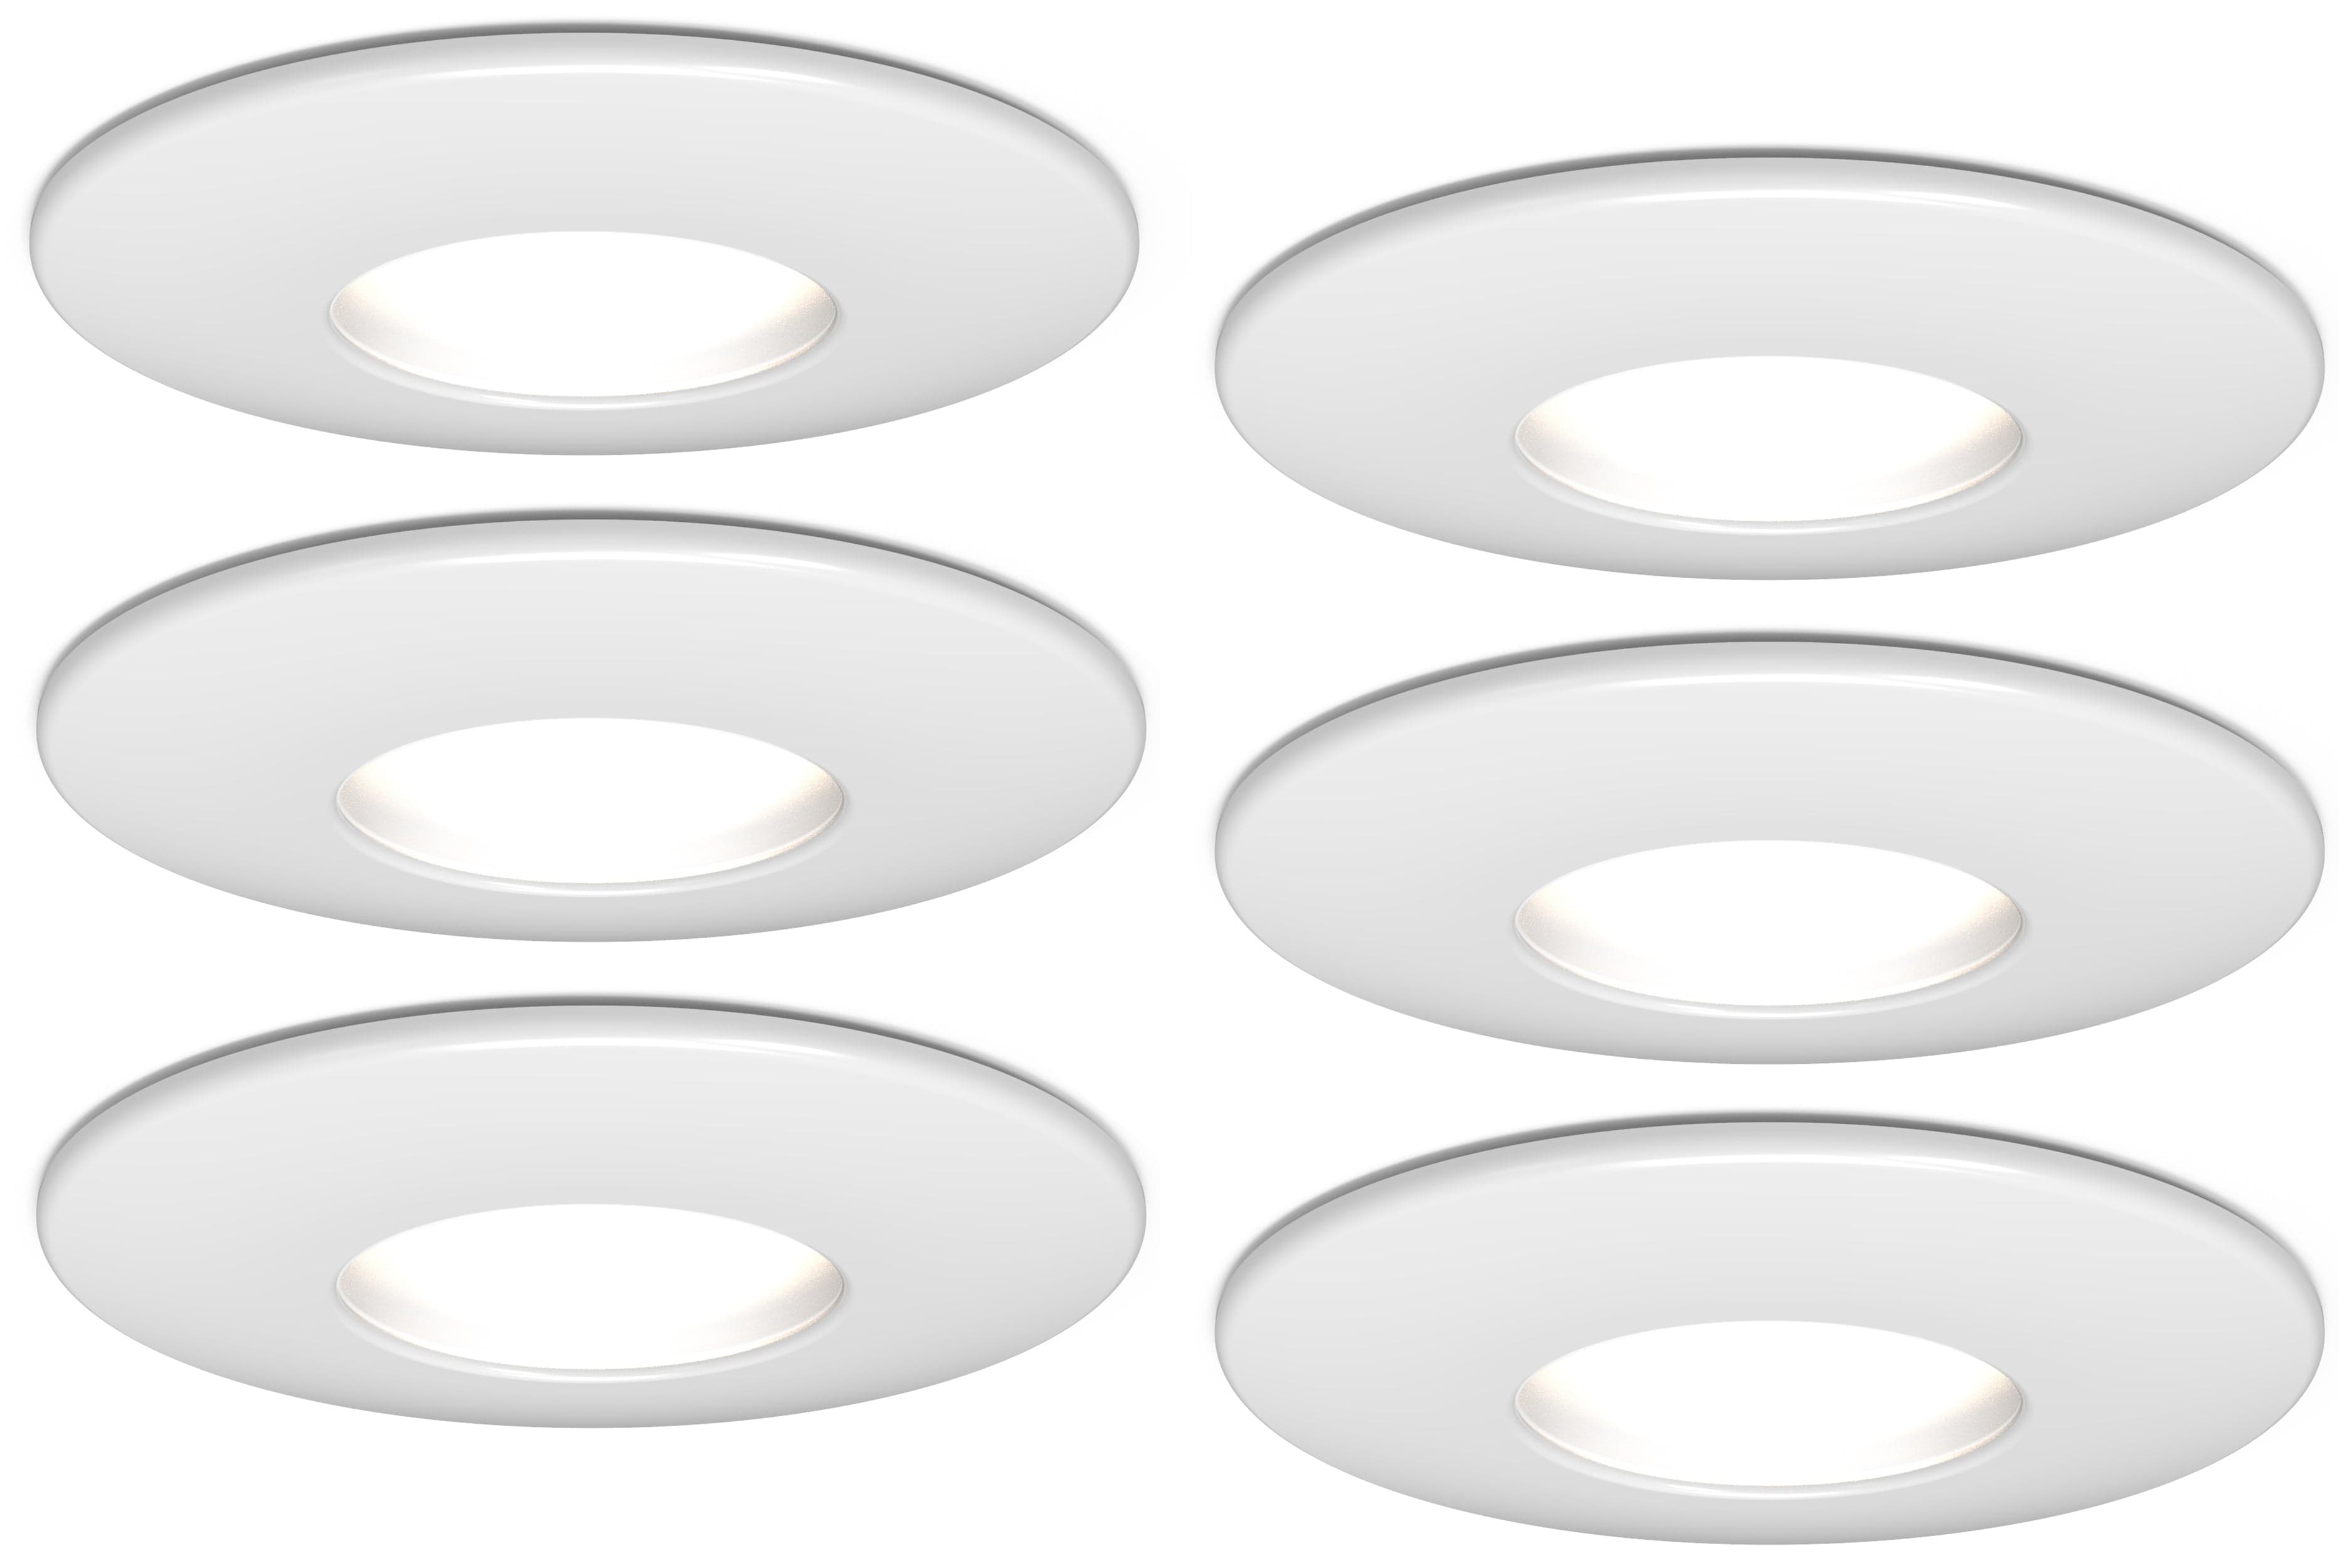 4lite IP20 GU10 Fire-Rated Downlight - Matte White (Pack of 6)